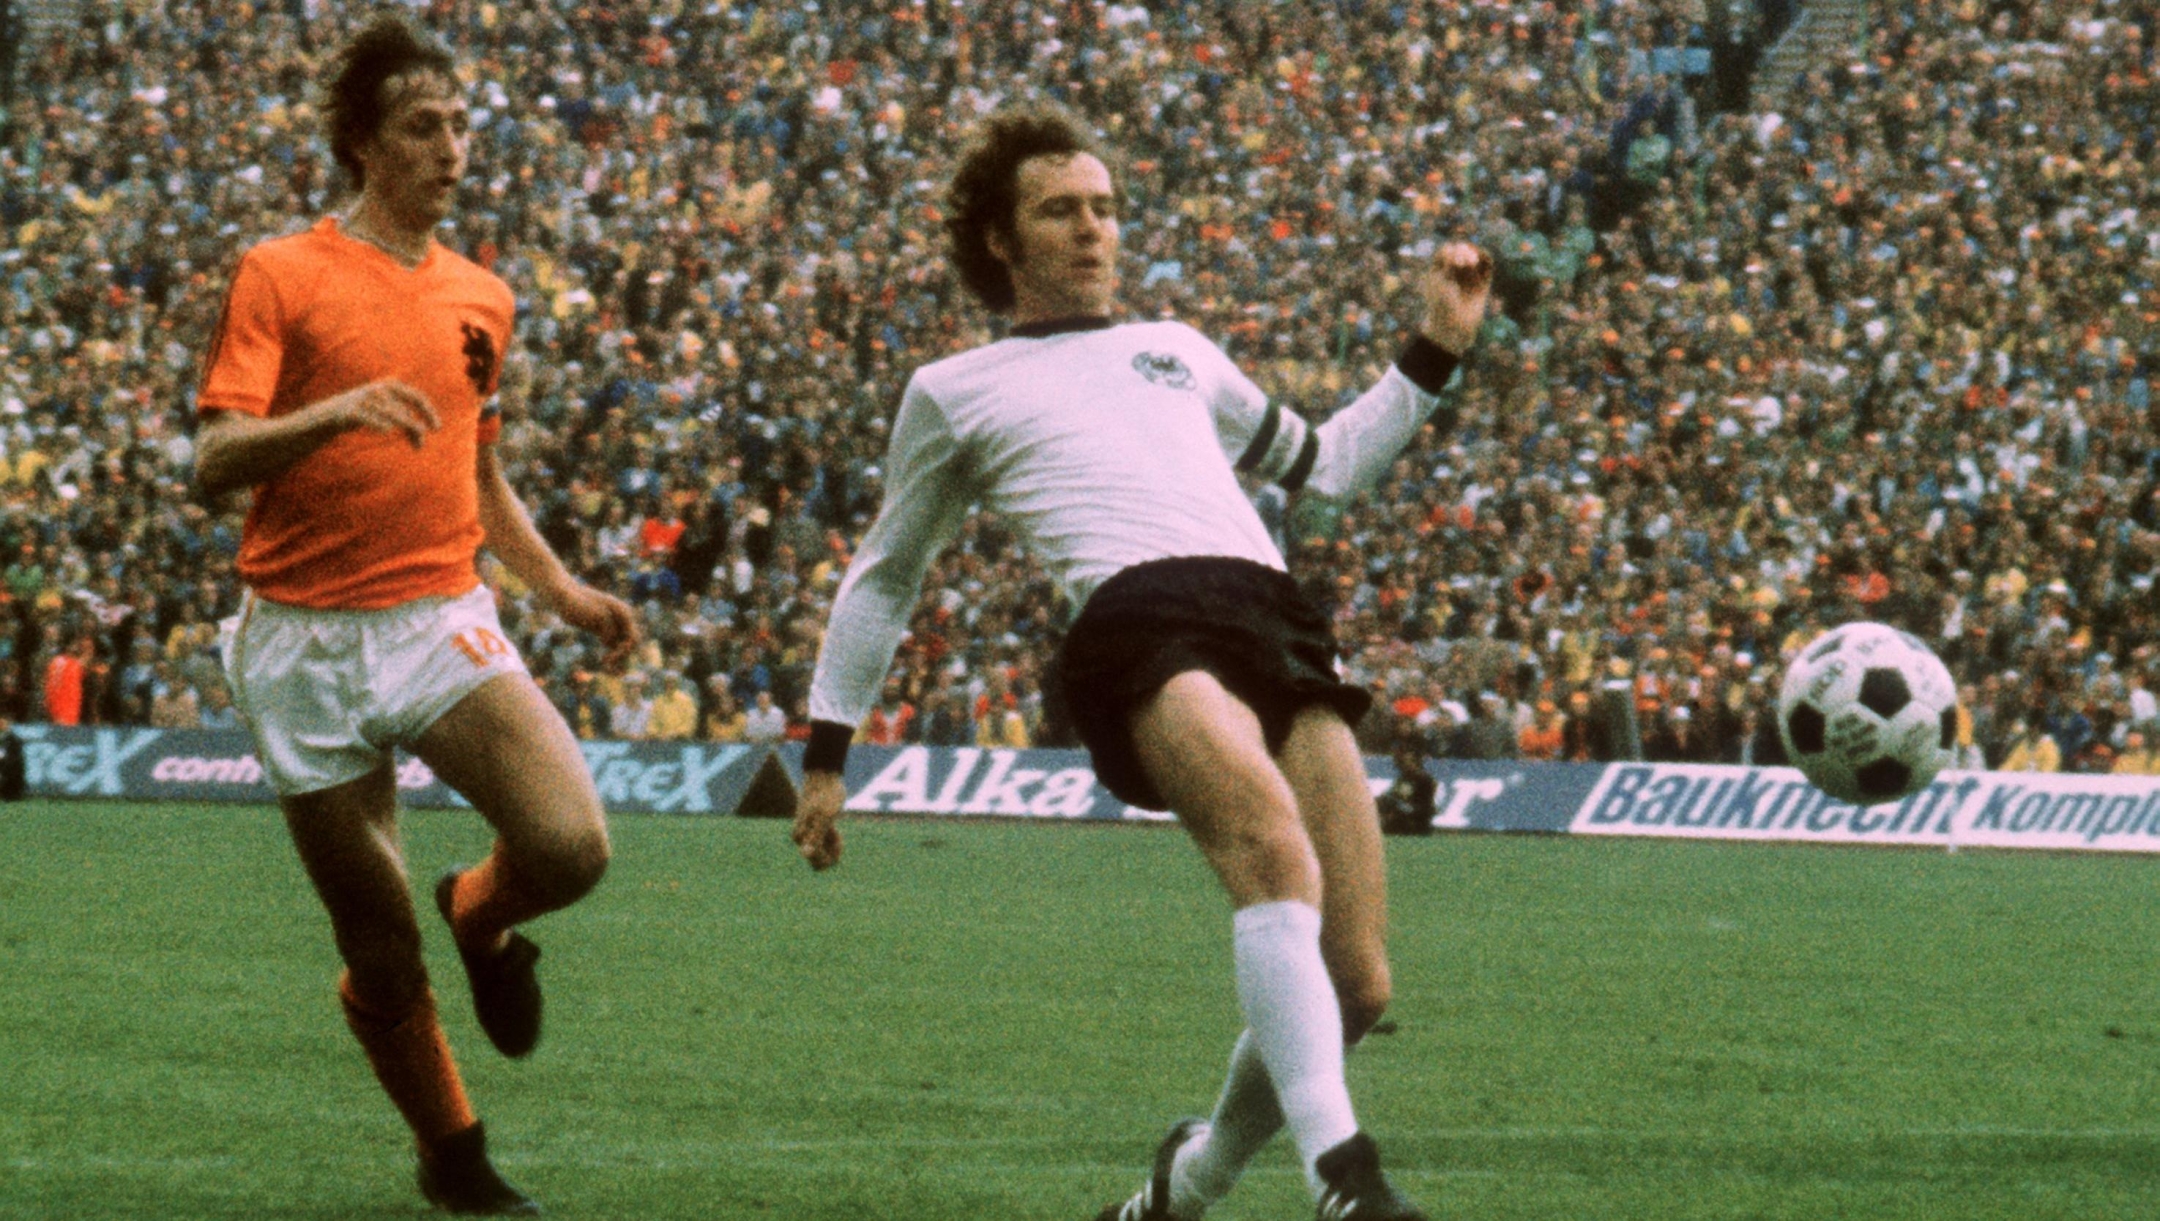 German international football player Franz Beckenbauer (right, Germany) and Dutch Johan Cruyff in action during the 1974 FIFA world cup final match Germany vs Netherlands on July 7th 1974 in Munich. Germany won this game 2:1 against Netherlands in front of 80.000 spectators and thus became world champion for the second time after 1954. (Photo by DPA / DPA/AFP / dpa Picture-Alliance via AFP)